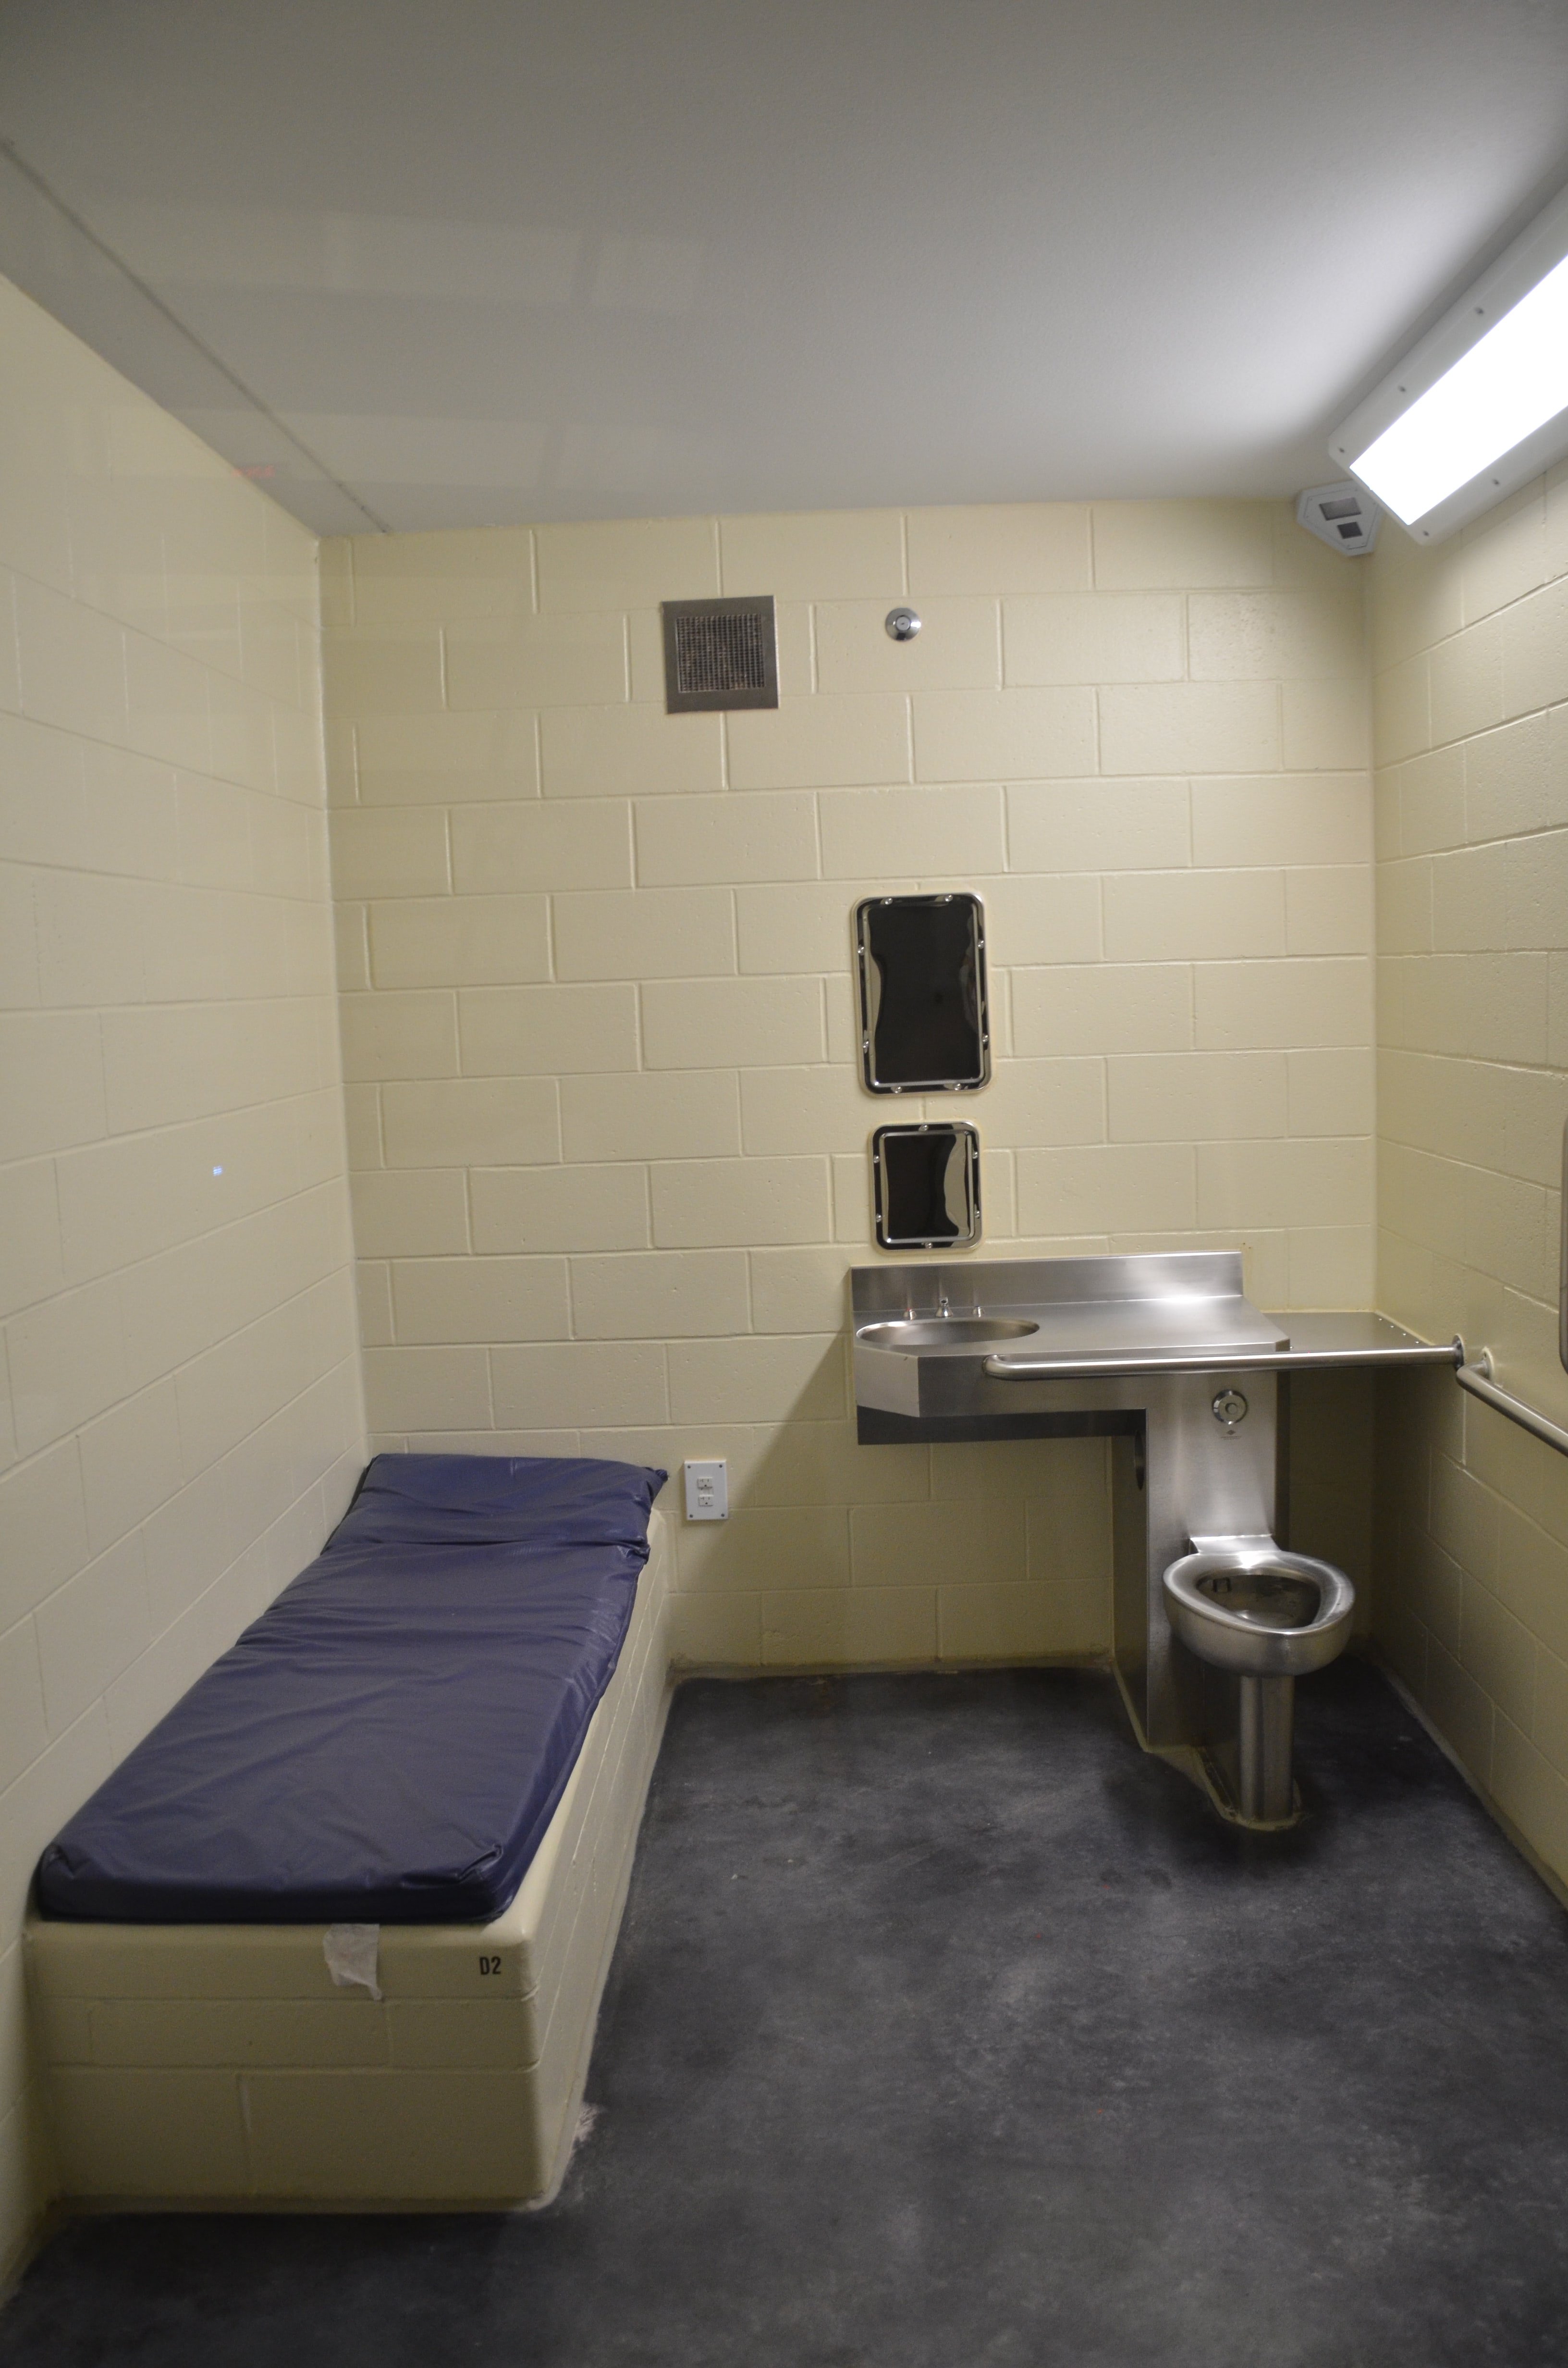 Green Lake County Government Center jail cell